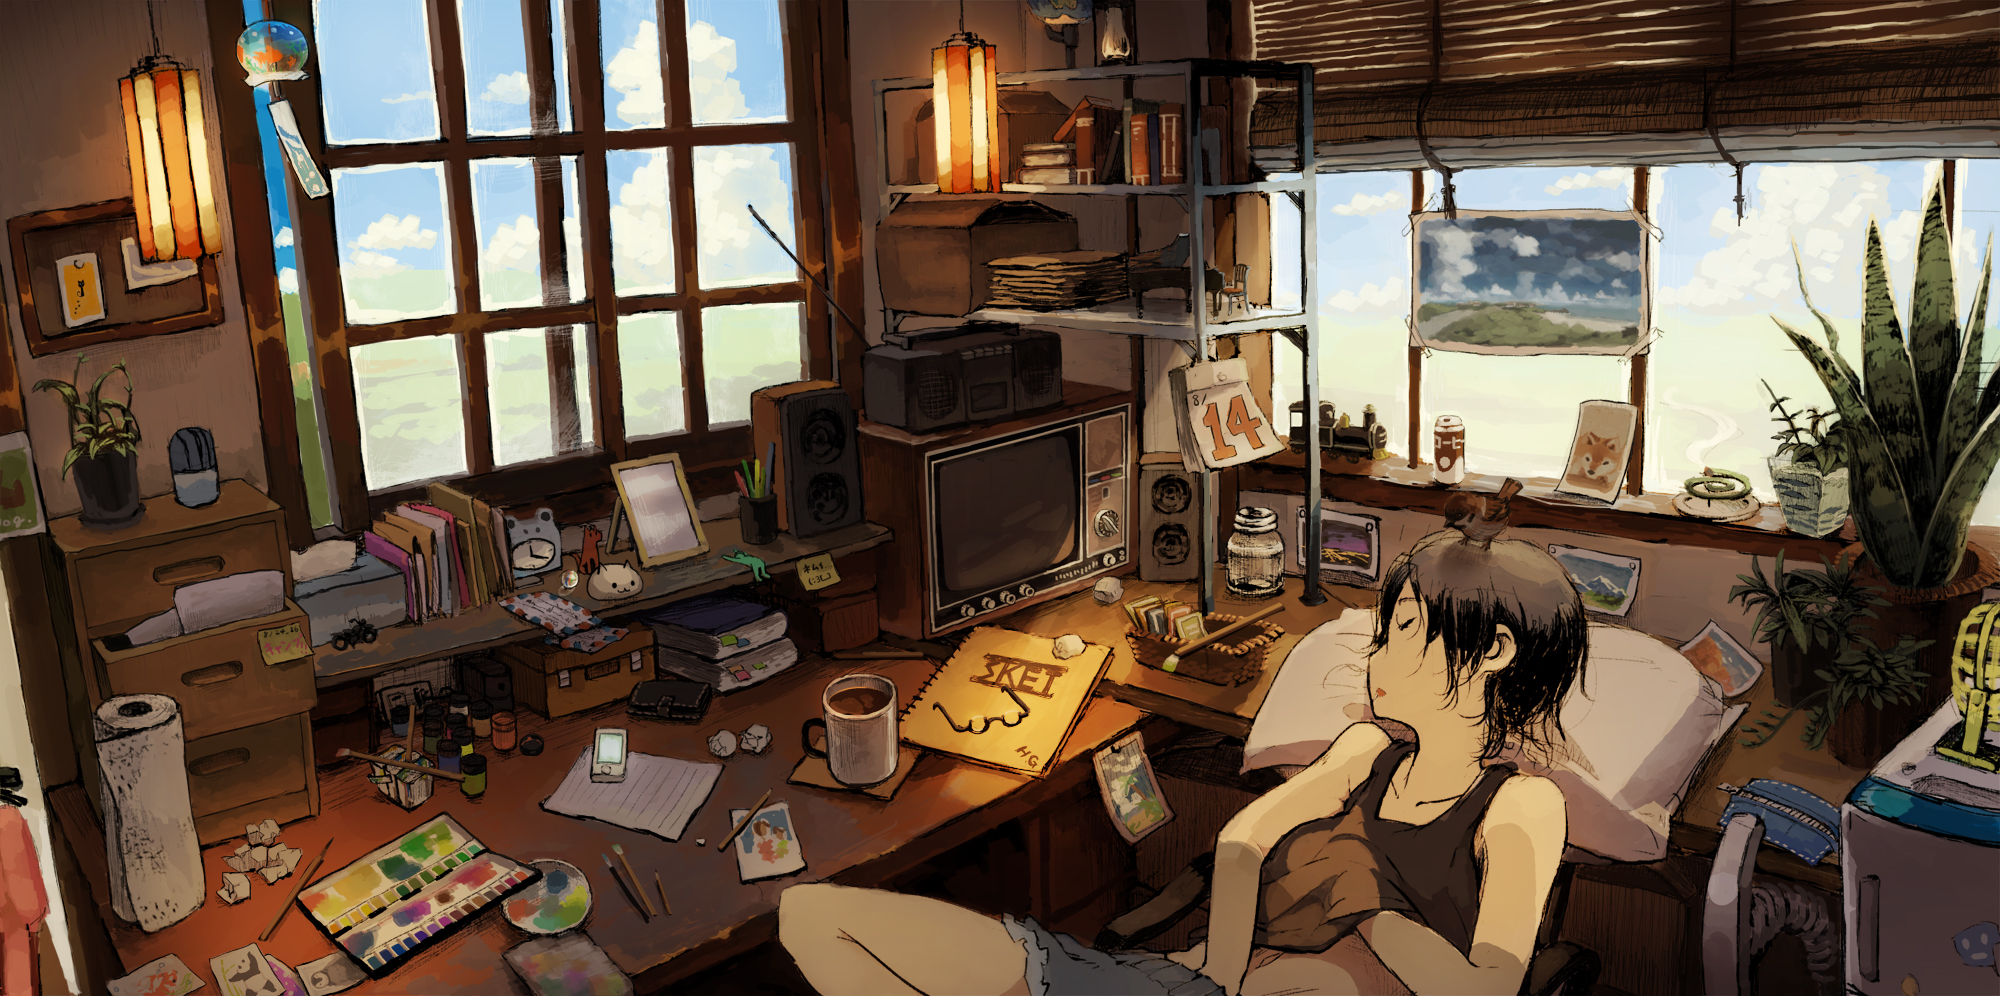 Download 1366x768 Anime Friendship Room Cozy Night Lamp Lights  Wallpapers for LaptopNotebook